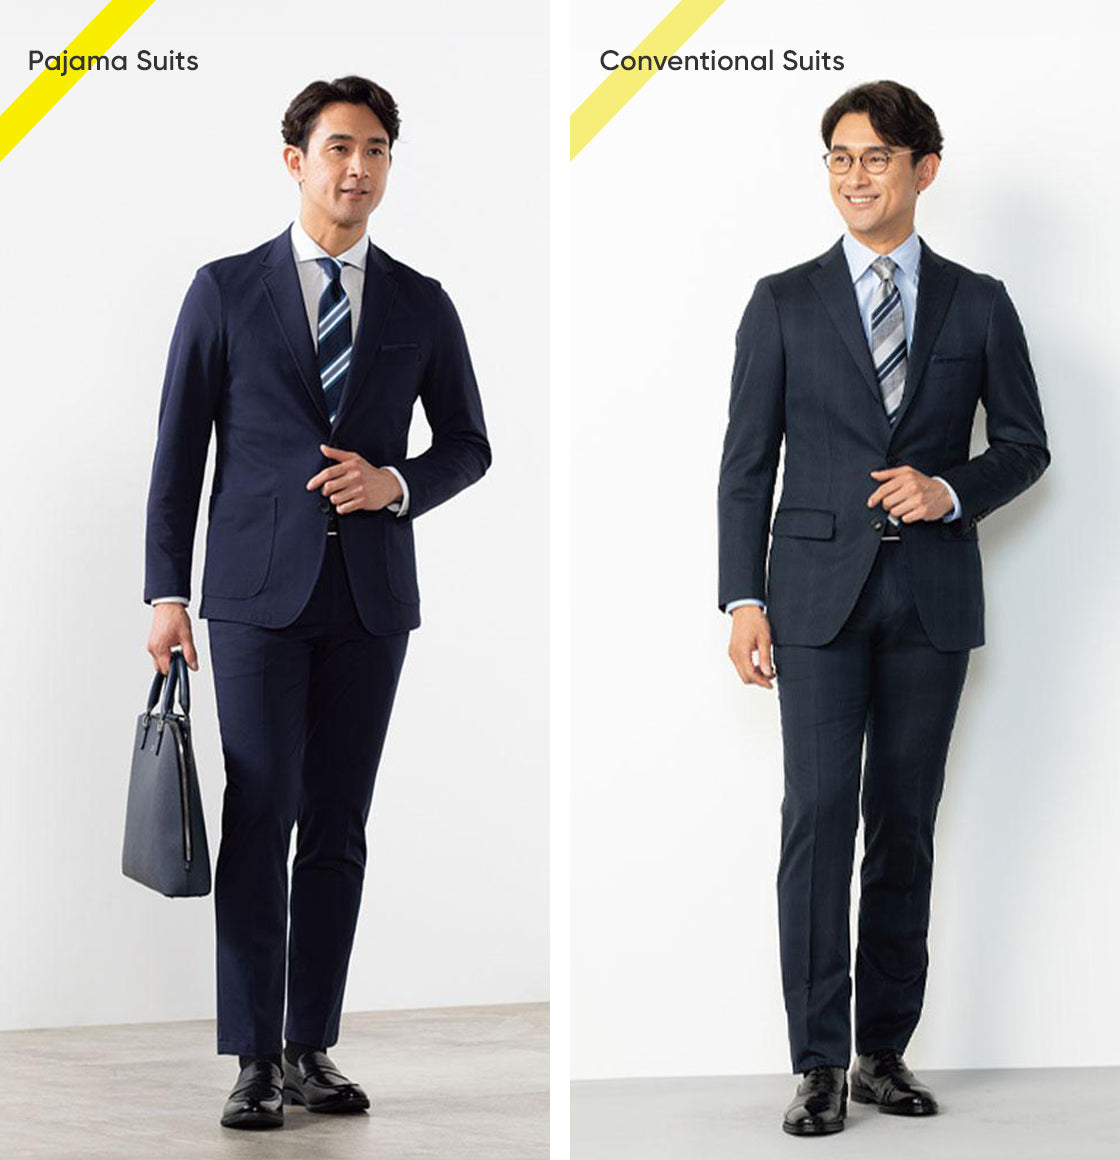 Differences from conventional suits